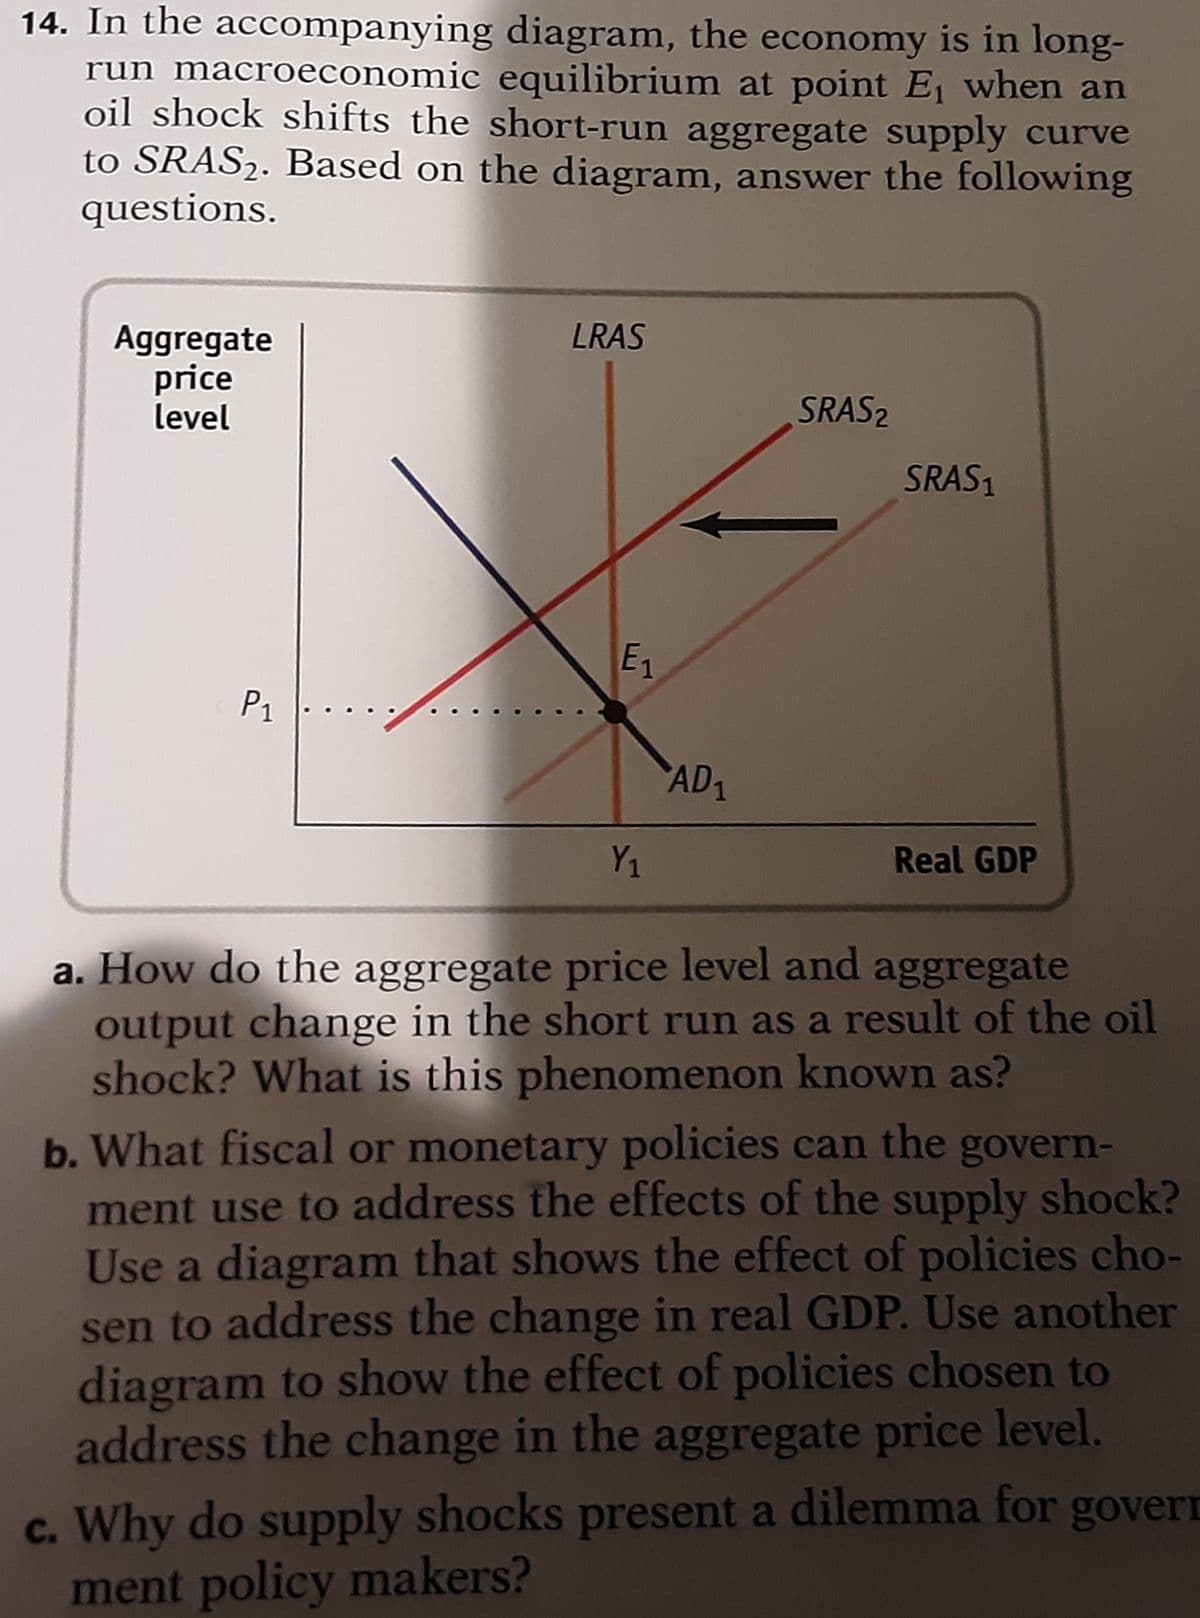 14. In the accompanying diagram, the economy is in long-
run macroeconomic equilibrium at point E when an
oil shock shifts the short-run aggregate supply curve
to SRAS2. Based on the diagram, answer the following
questions.
LRAS
Aggregate
price
level
SRAS2
SRAS1
E1
P1
..
AD1
Y1
Real GDP
a. How do the aggregate price level and aggregate
output change in the short run as a result of the oil
shock? What is this phenomenon known as?
b. What fiscal or monetary policies can the govern-
ment use to address the effects of the supply shock?
Use a diagram that shows the effect of policies cho-
sen to address the change in real GDP. Use another
diagram to show the effect of policies chosen to
address the change in the aggregate price level.
c. Why do supply shocks present a dilemma for govern
ment policy makers?
